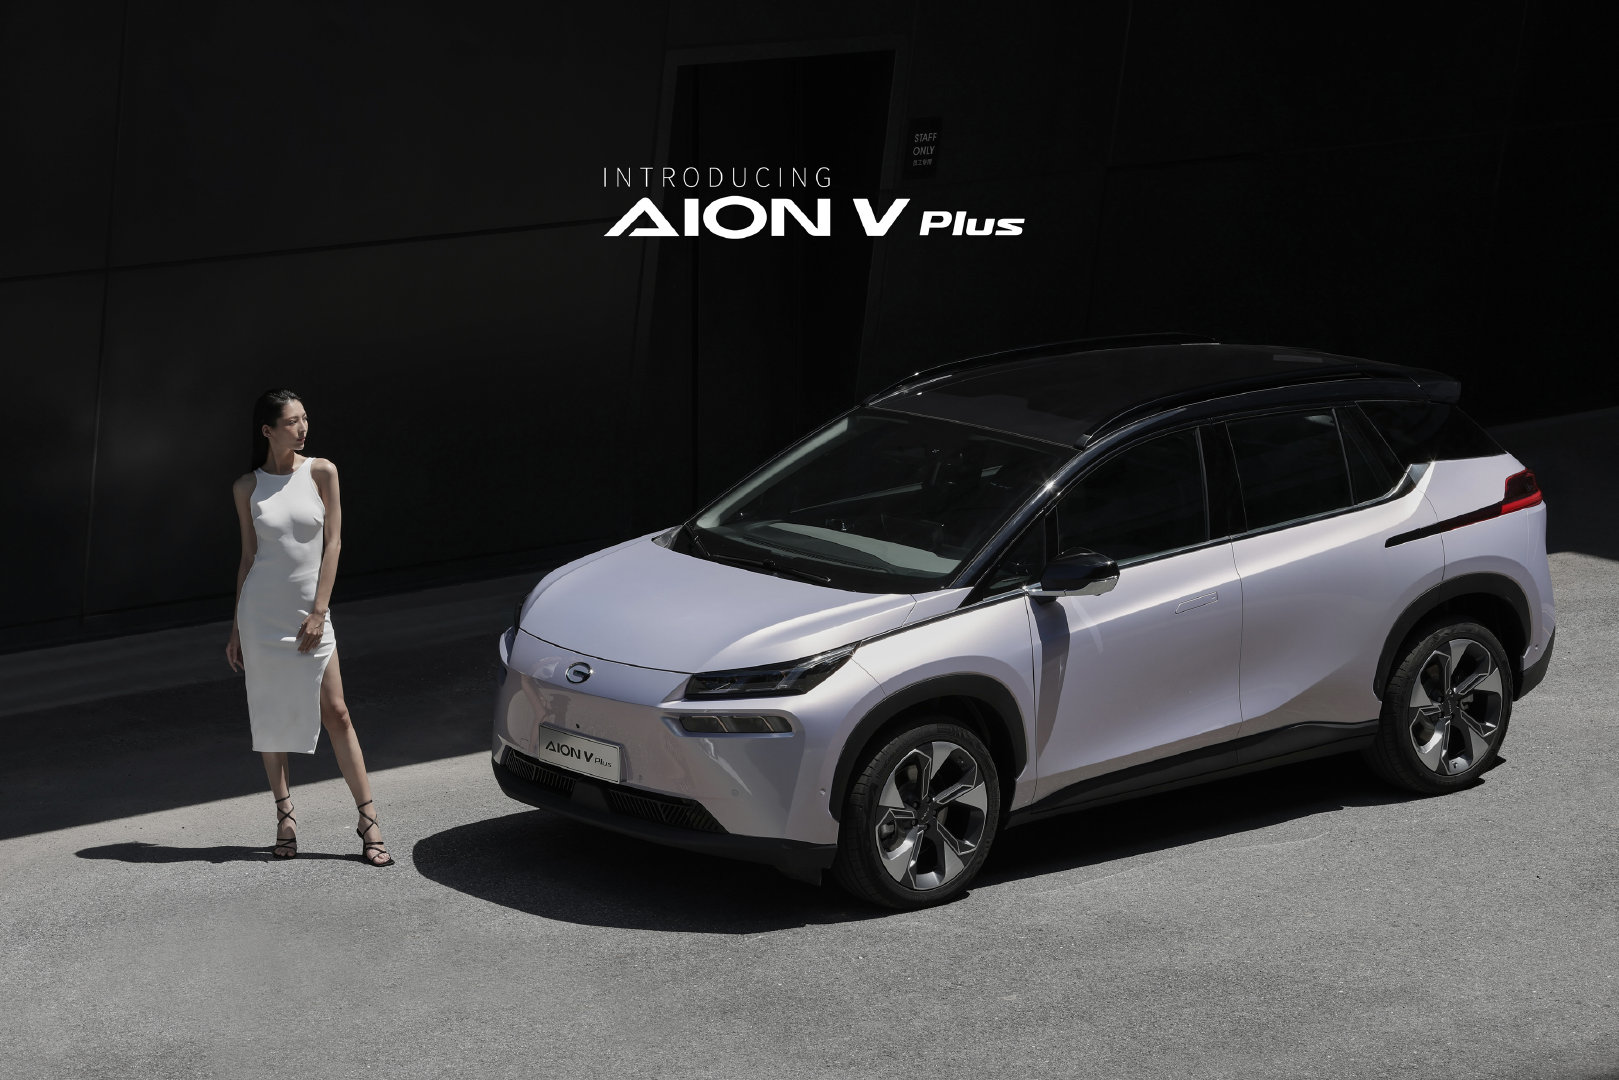 GAC Aion to officially launch Aion V Plus, first model to support its